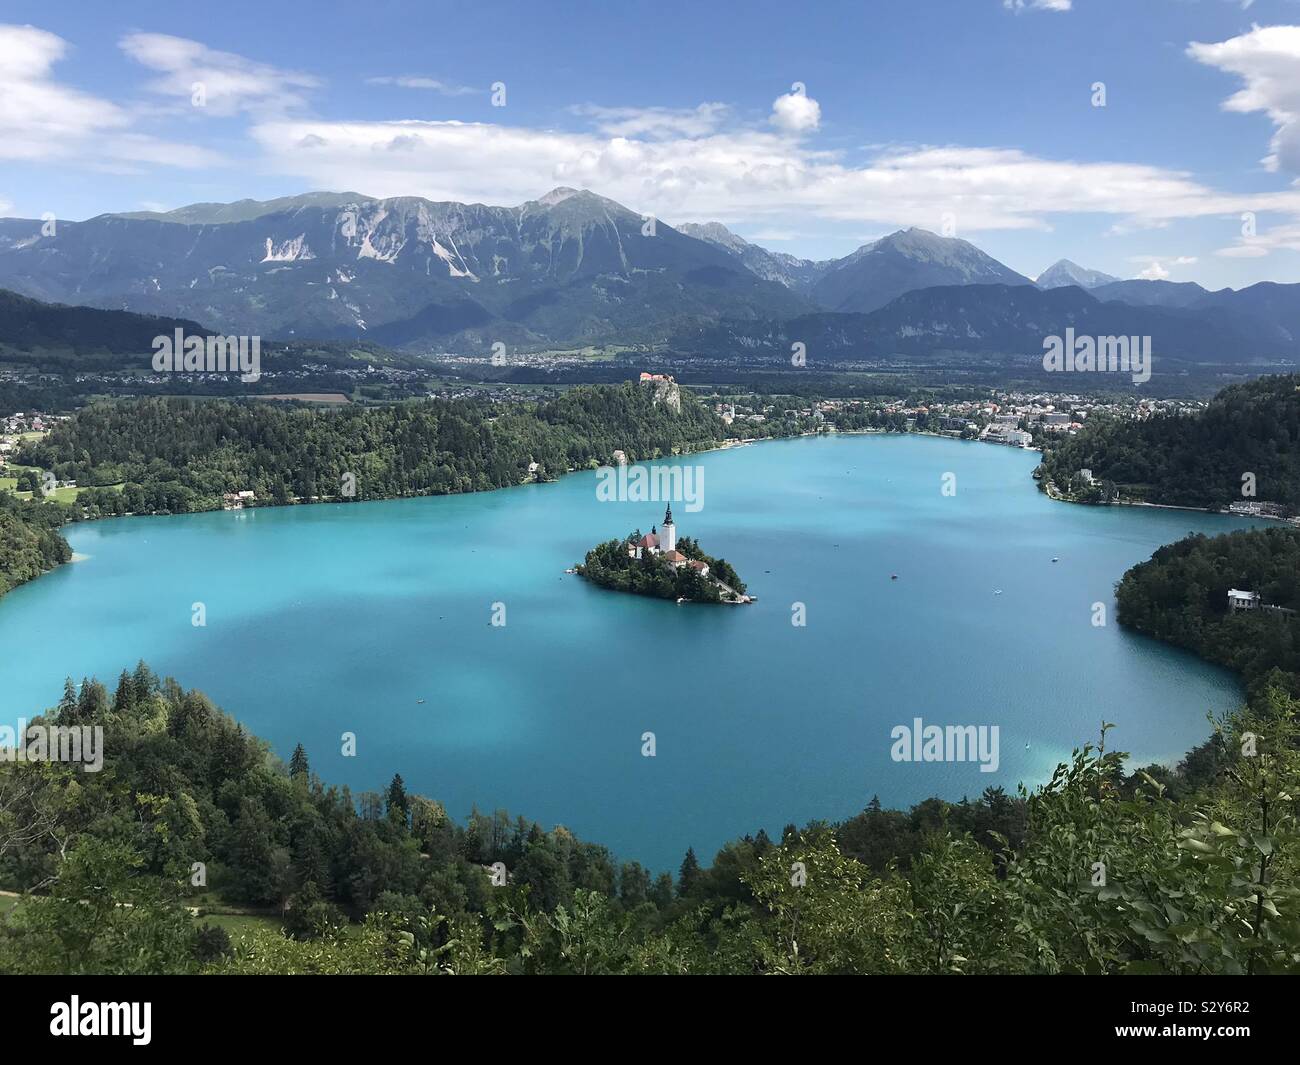 Breathtaking see sight of Bled’s lake in Slovenia. Stock Photo